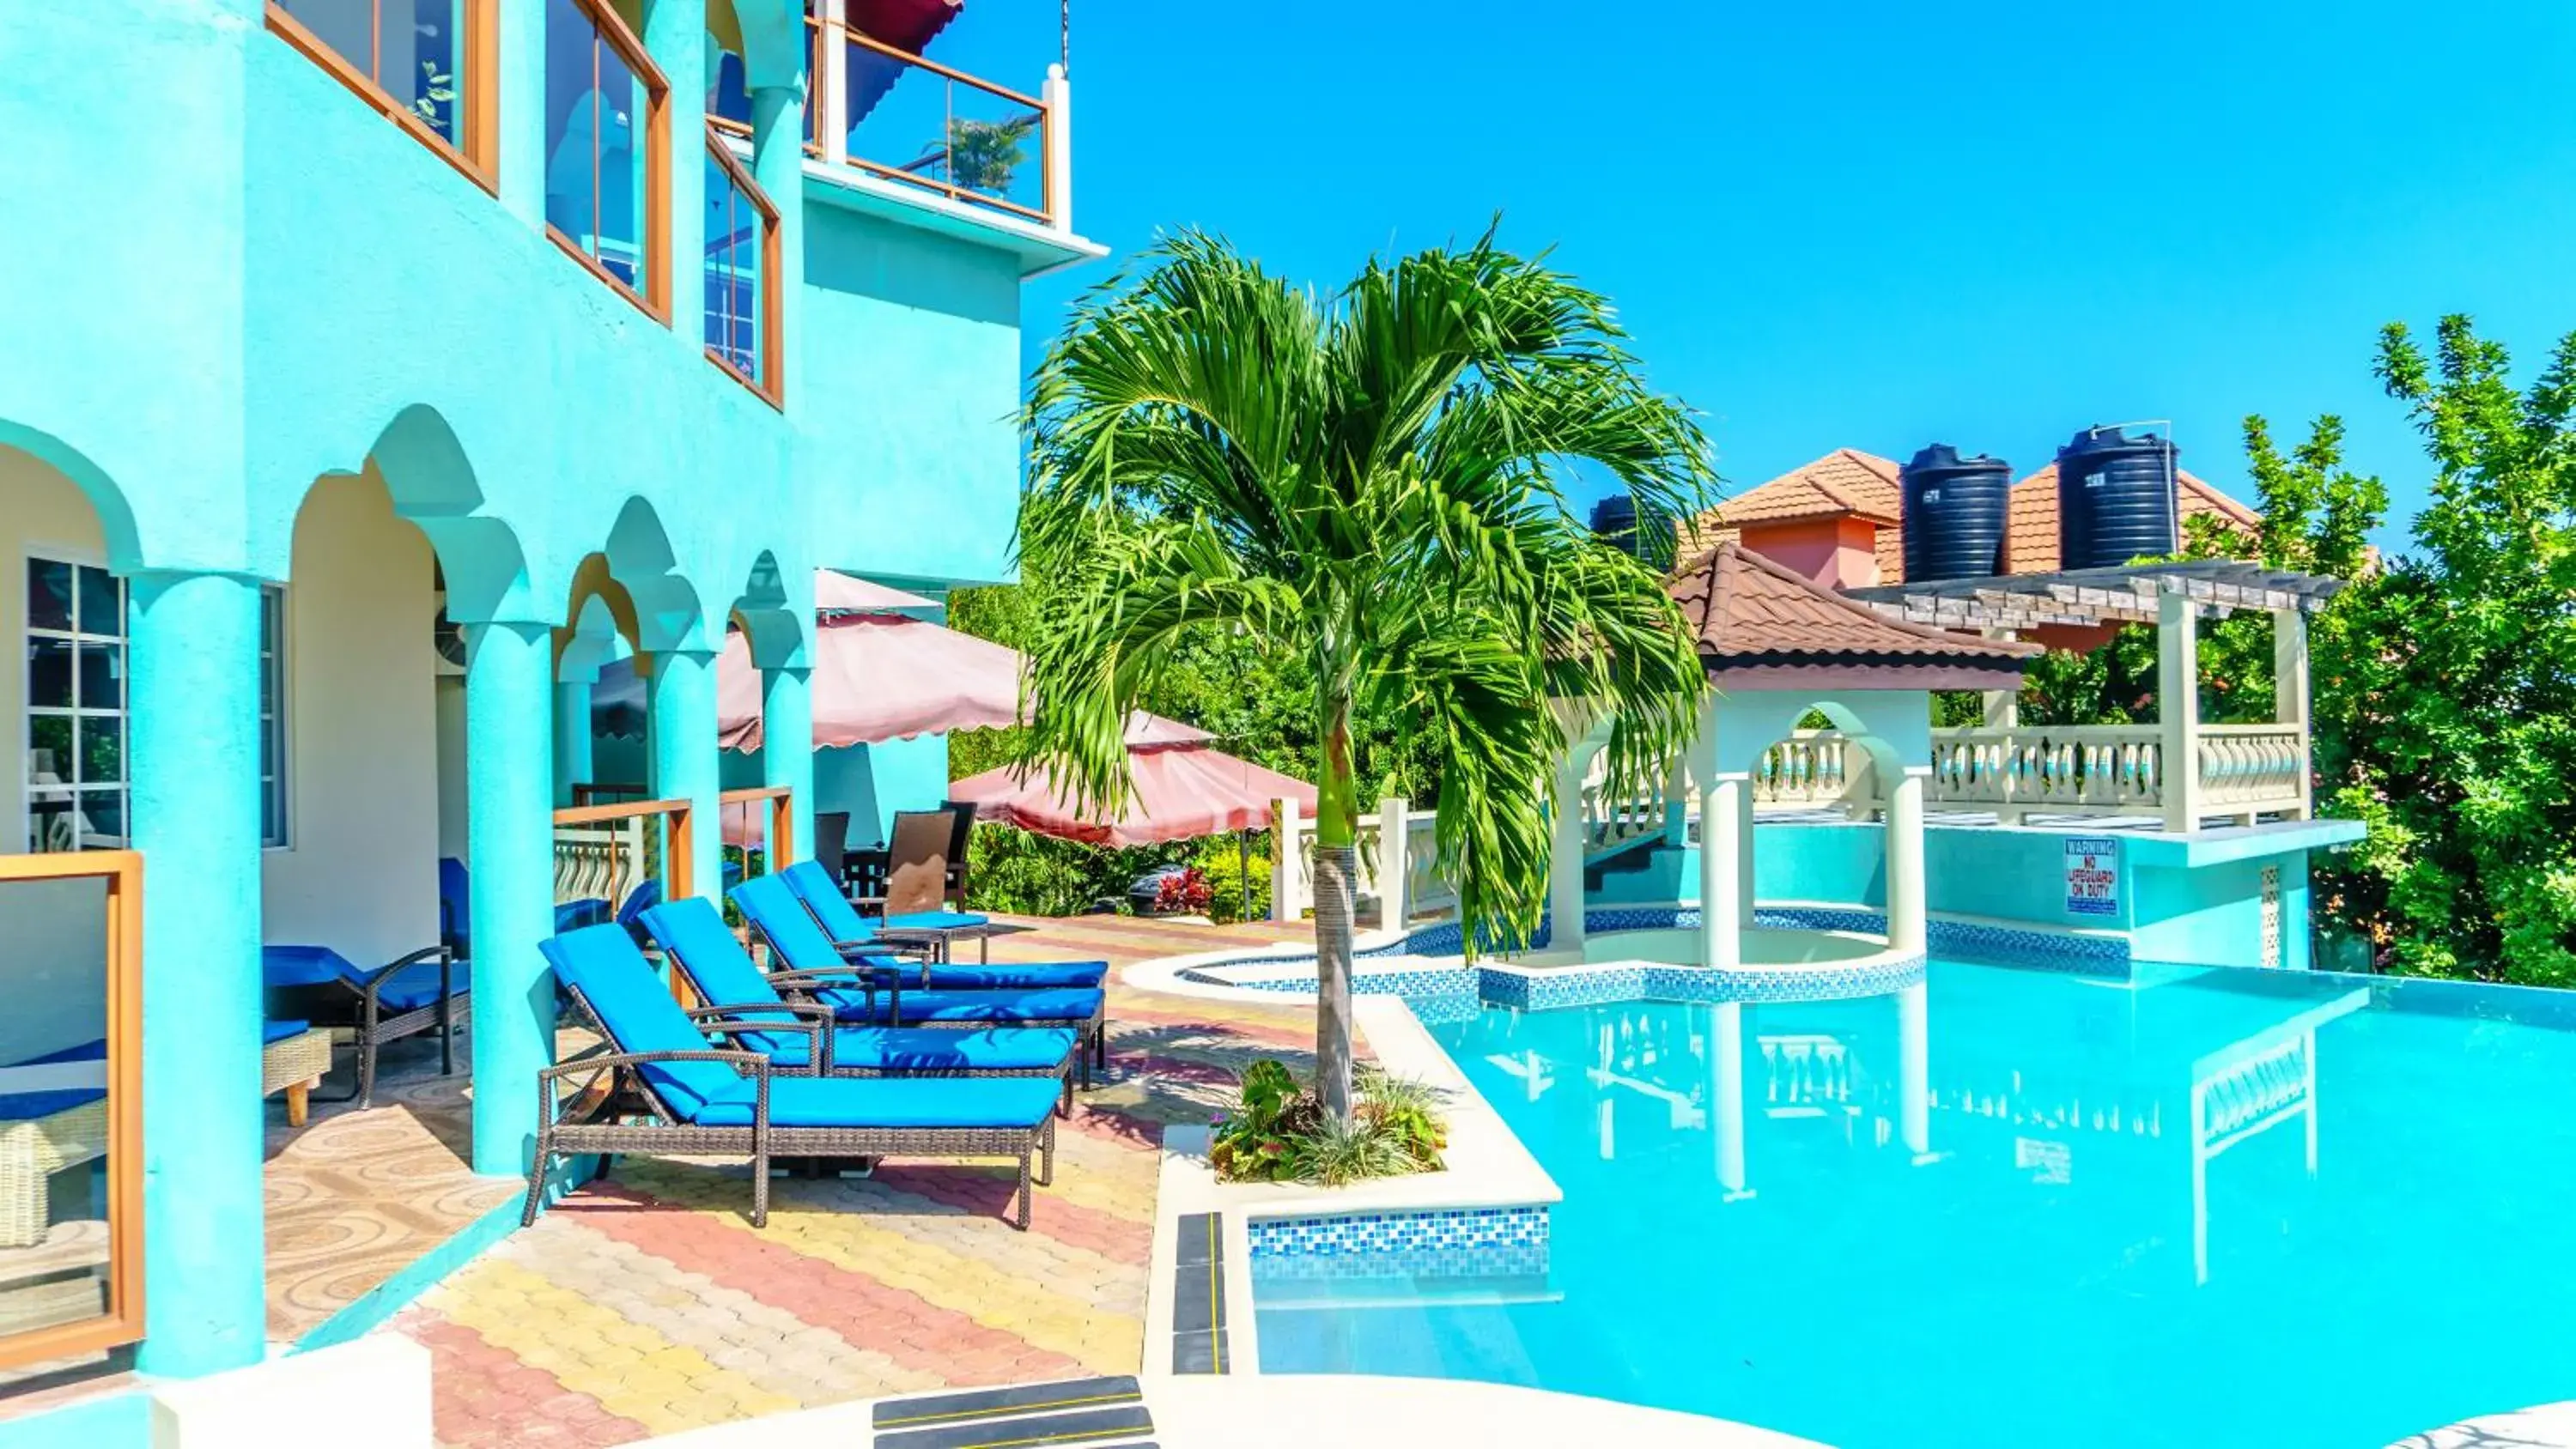 Swimming Pool in Skyblue Resort Negril